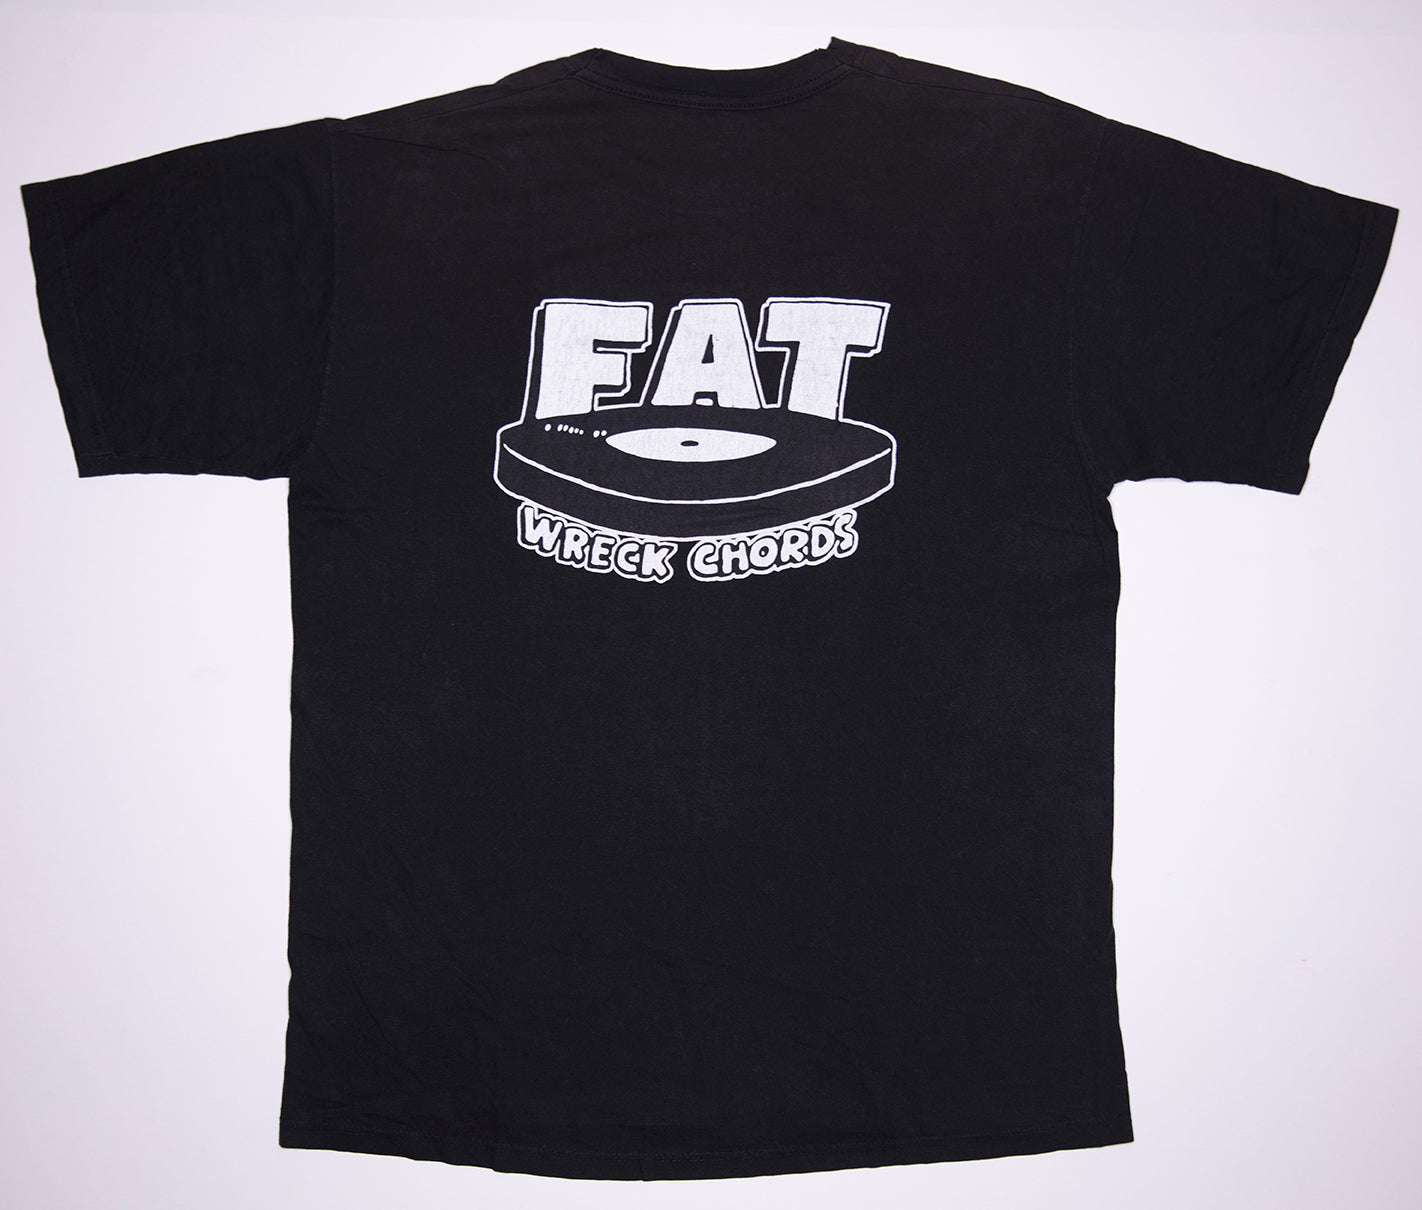 HI Standard - Attack From The Far East Tour Shirt Size Large